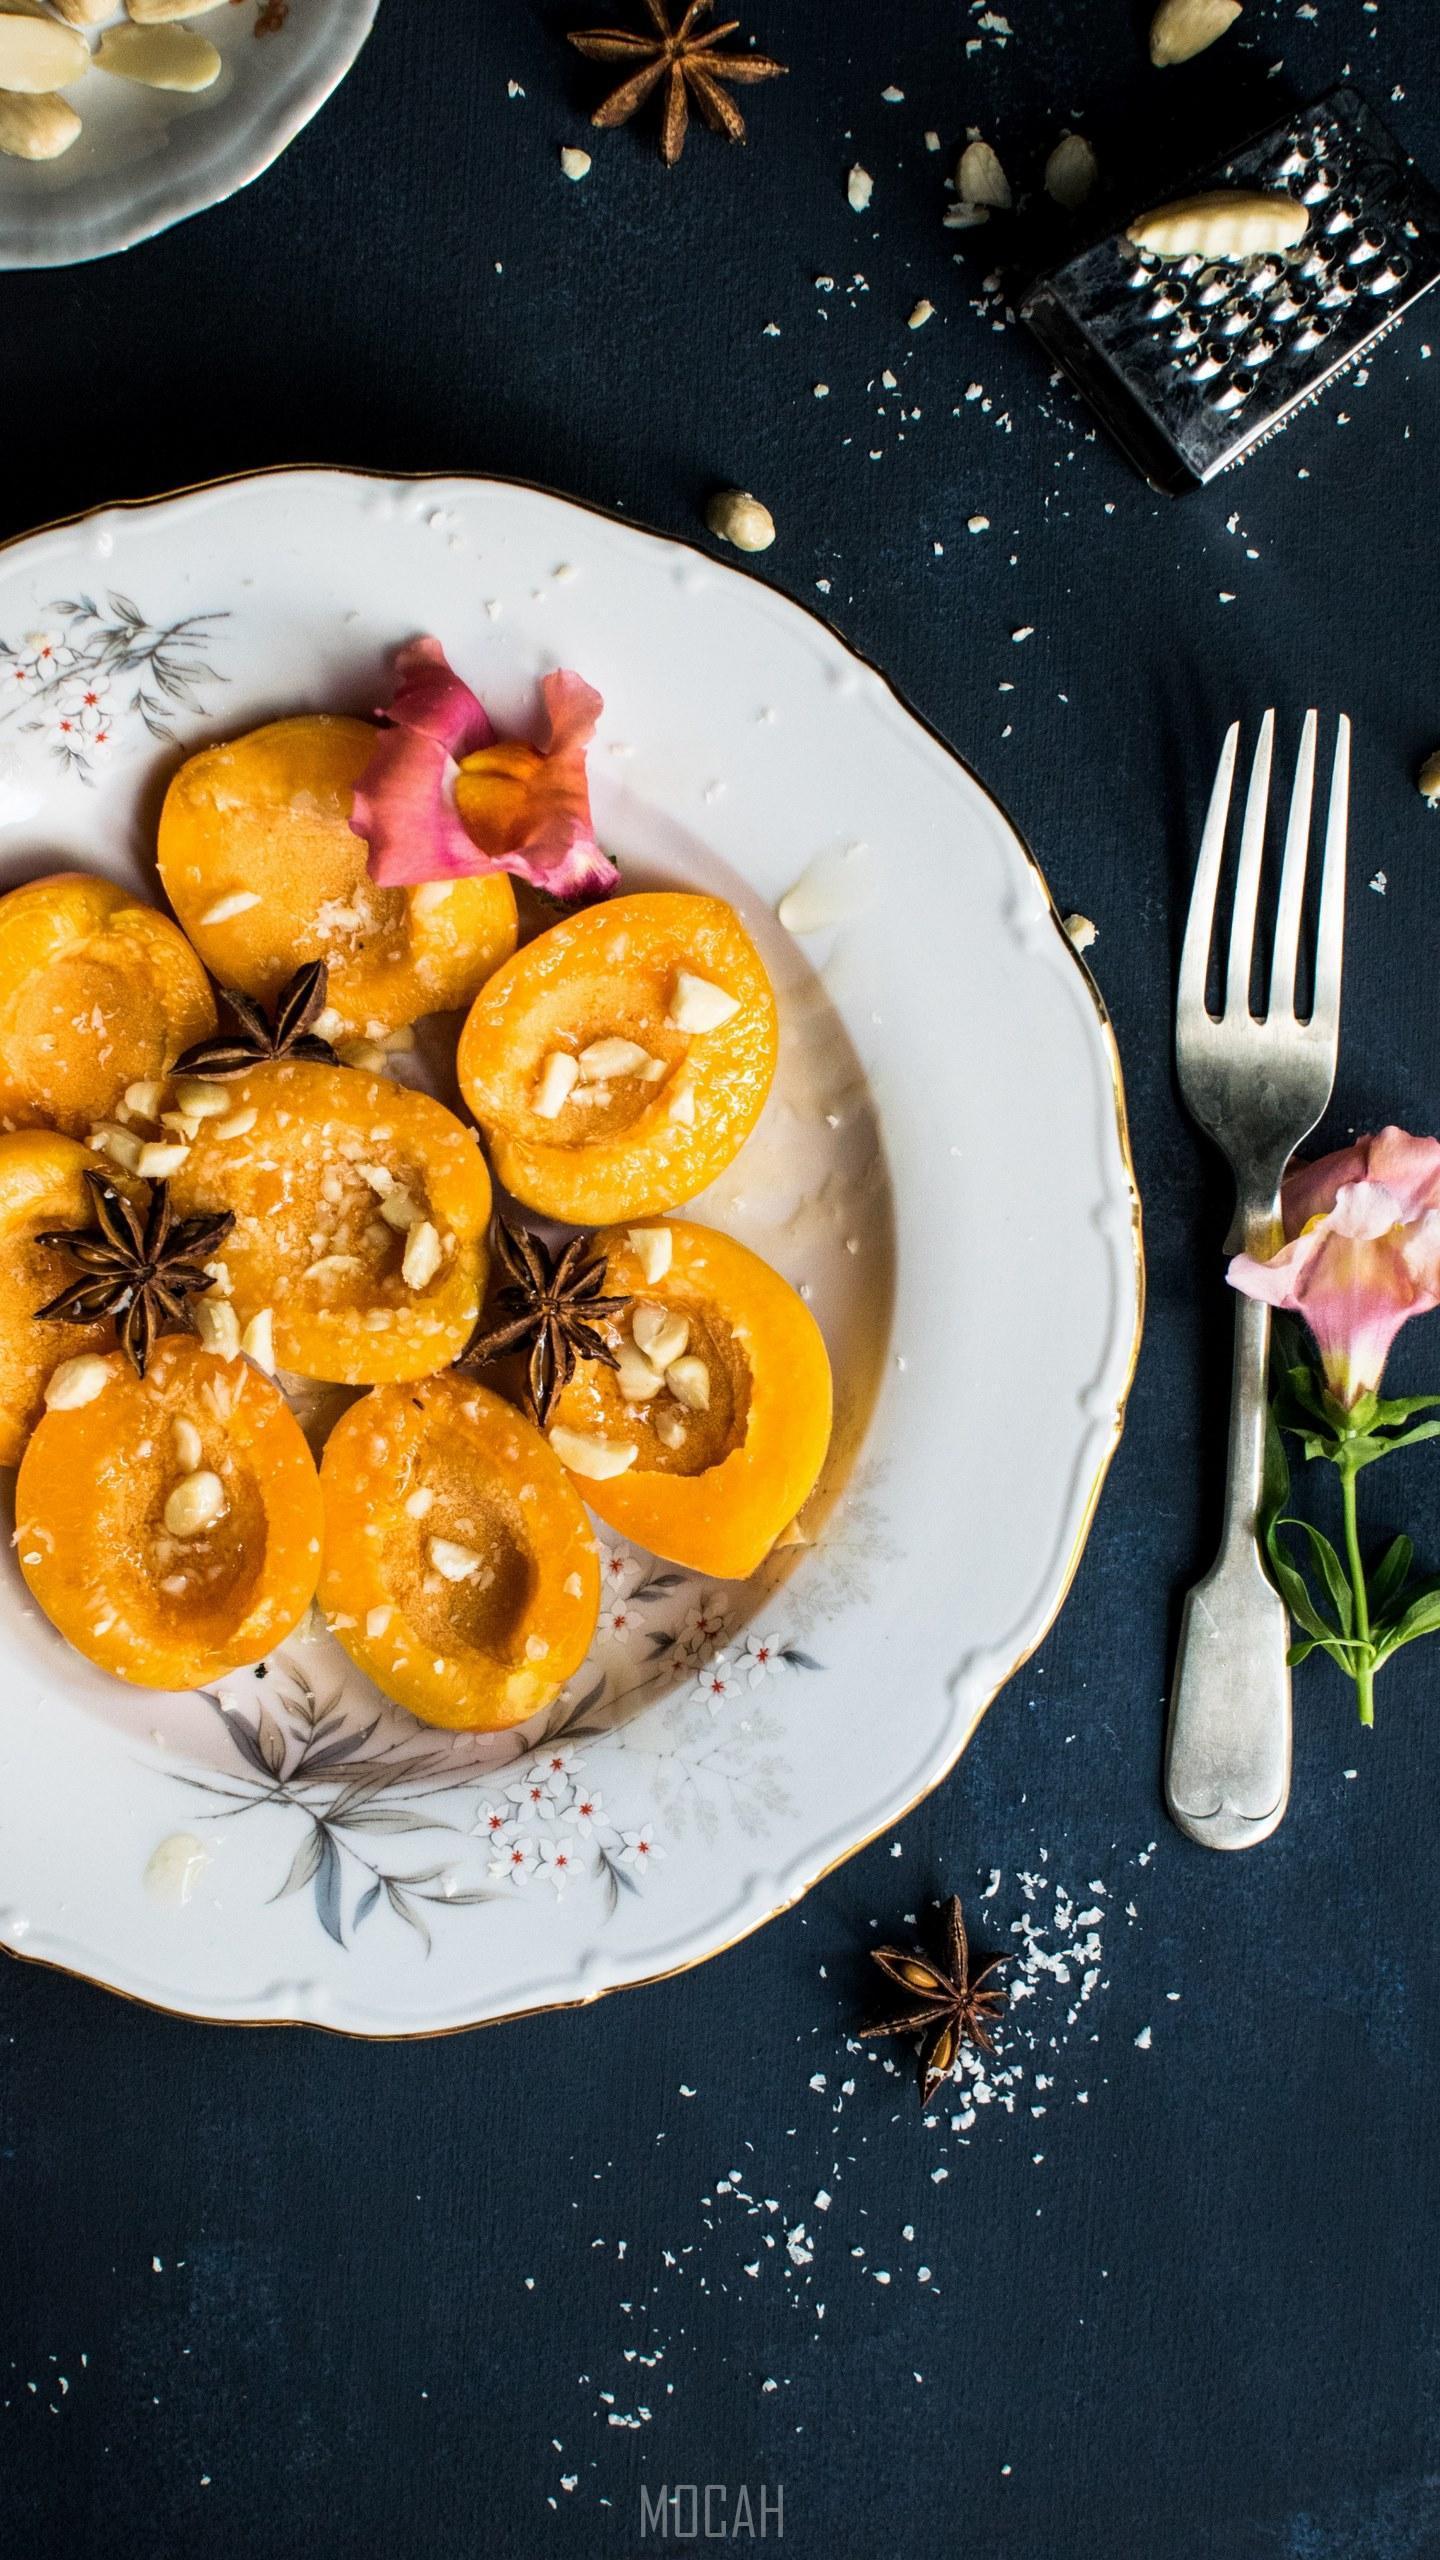 HD wallpaper, 1440X2560, Apricot In The Dark Style, Halved Peaches With Spices On A Plate For Dessert, Lenovo Phab 2 Pro Wallpaper Hd Free Download